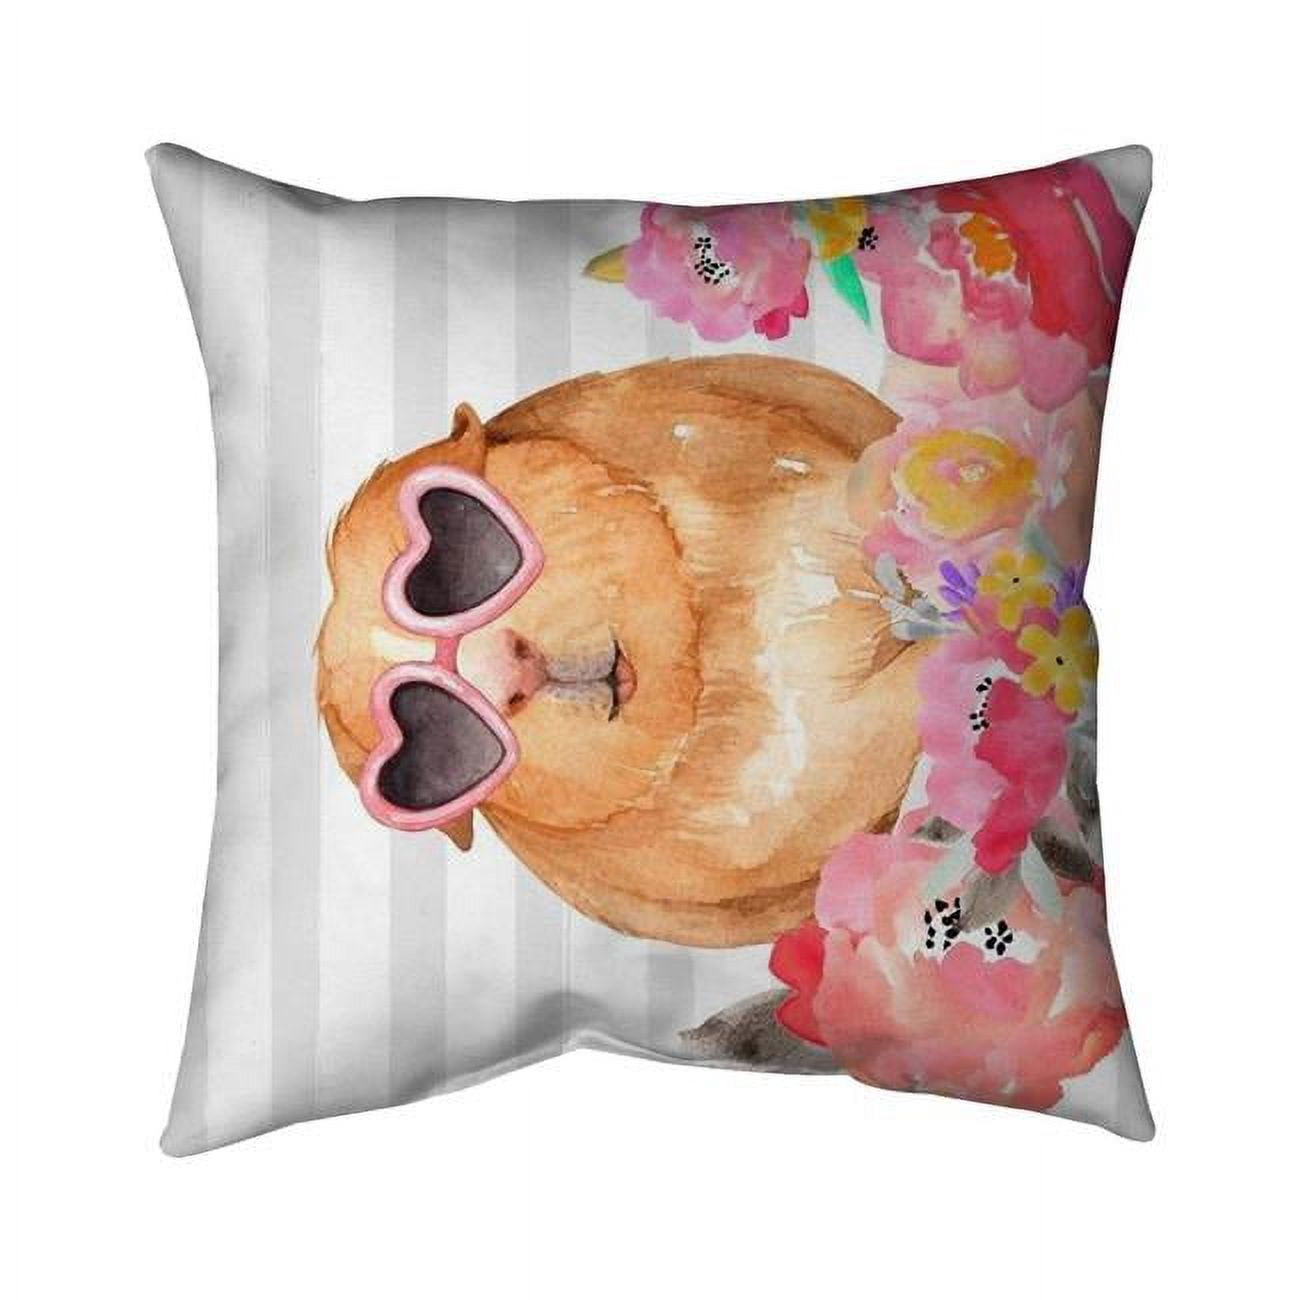 Fondo 20 x 20 in. Guinea Pig with Glasses-Double Sided Print Outdoor Pillow Cover